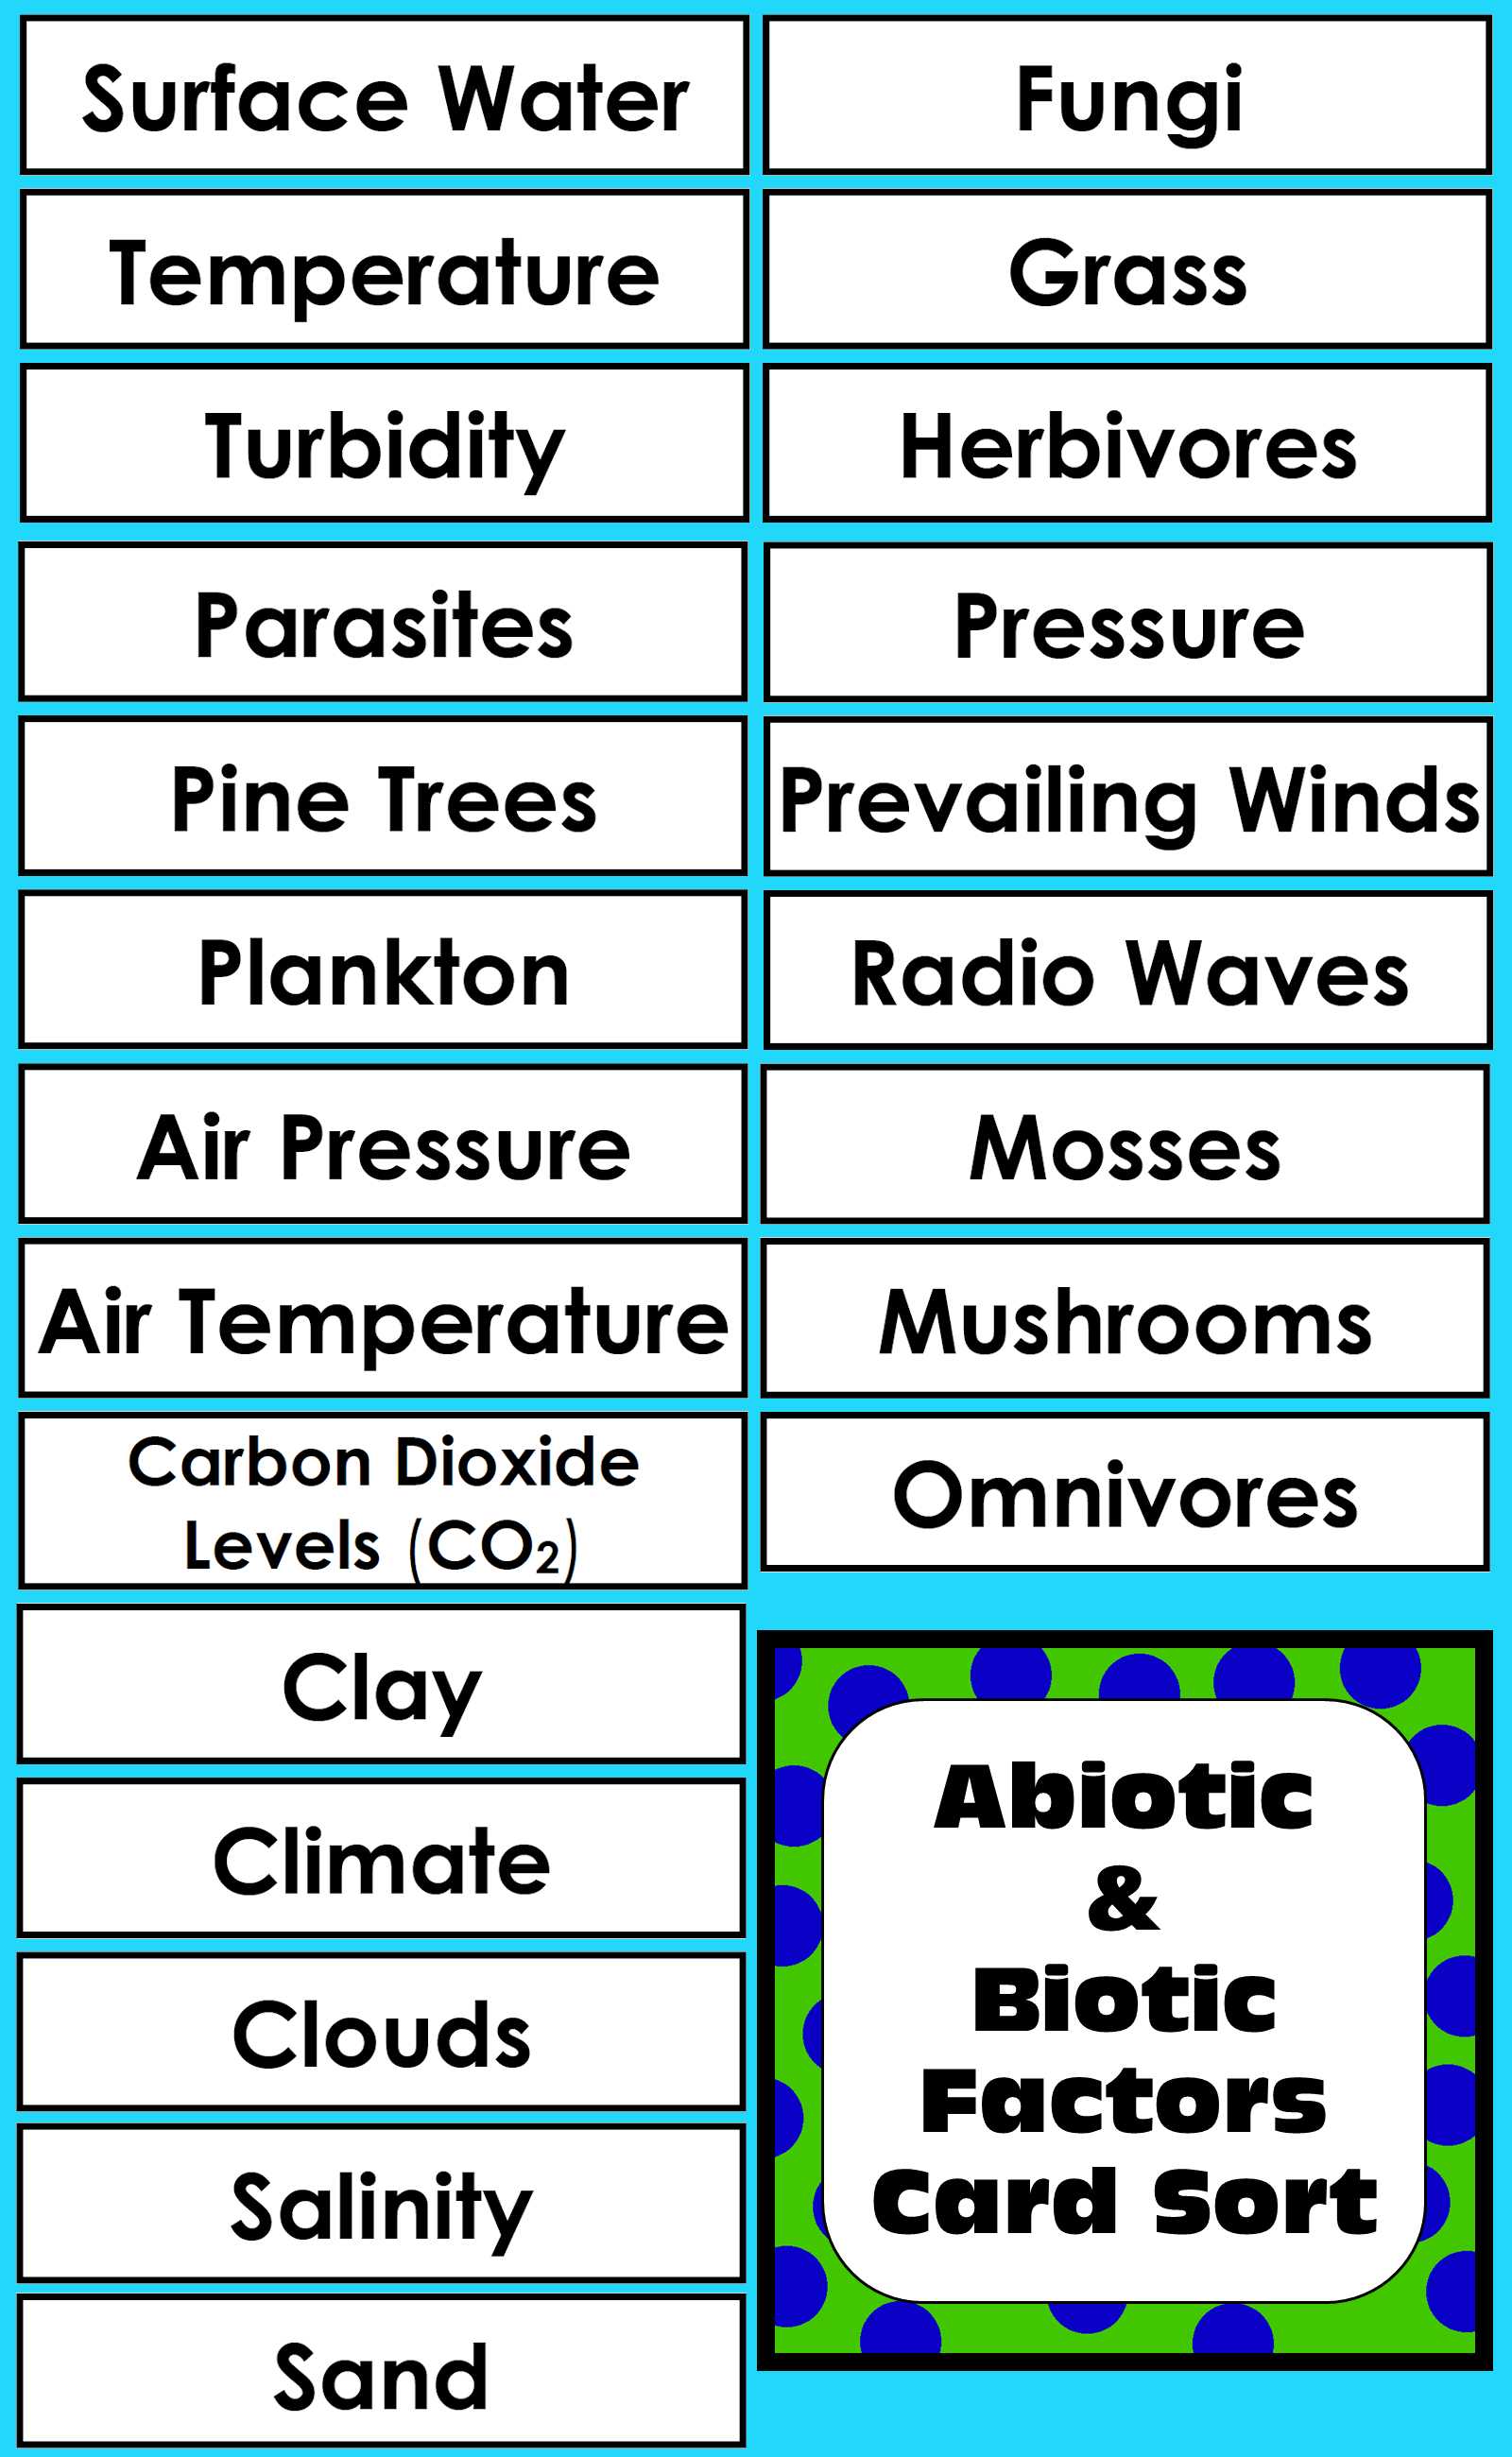 Patterns Of Inheritance Worksheet together with Abiotic & Biotic Factors Living & Non Living Things In Ecosystems